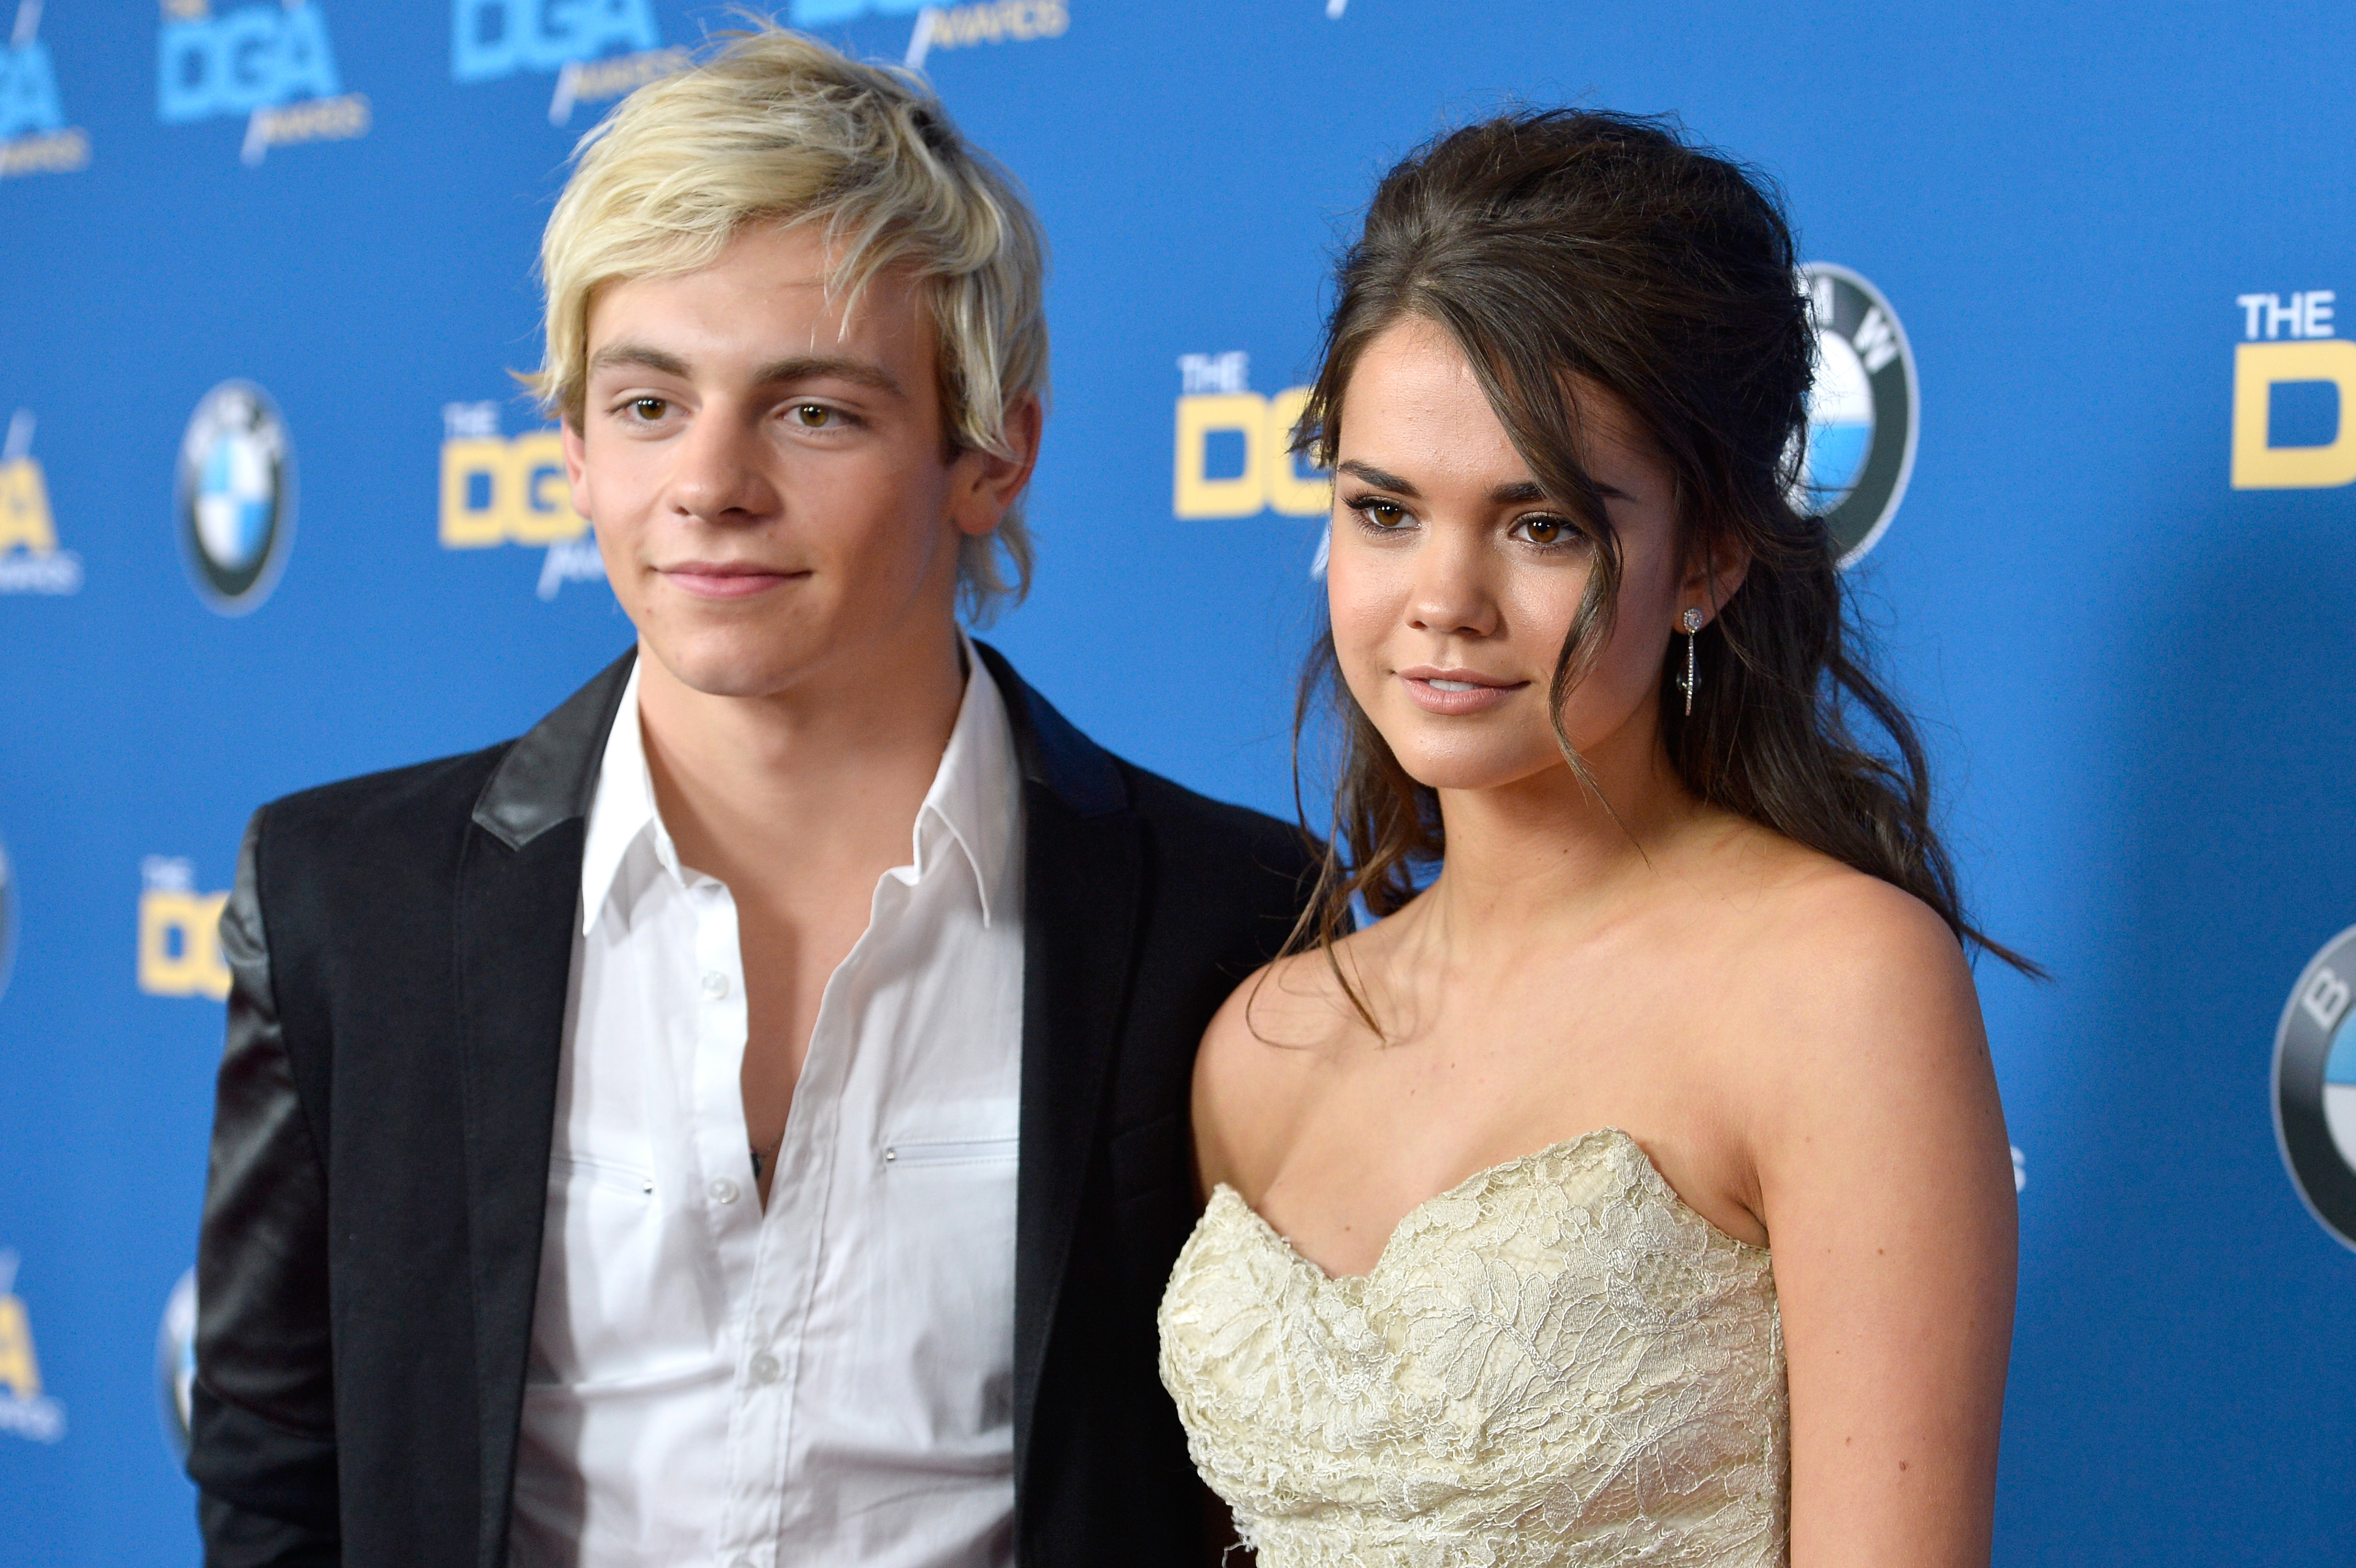 Who is maia mitchell dating right now in San Francisco